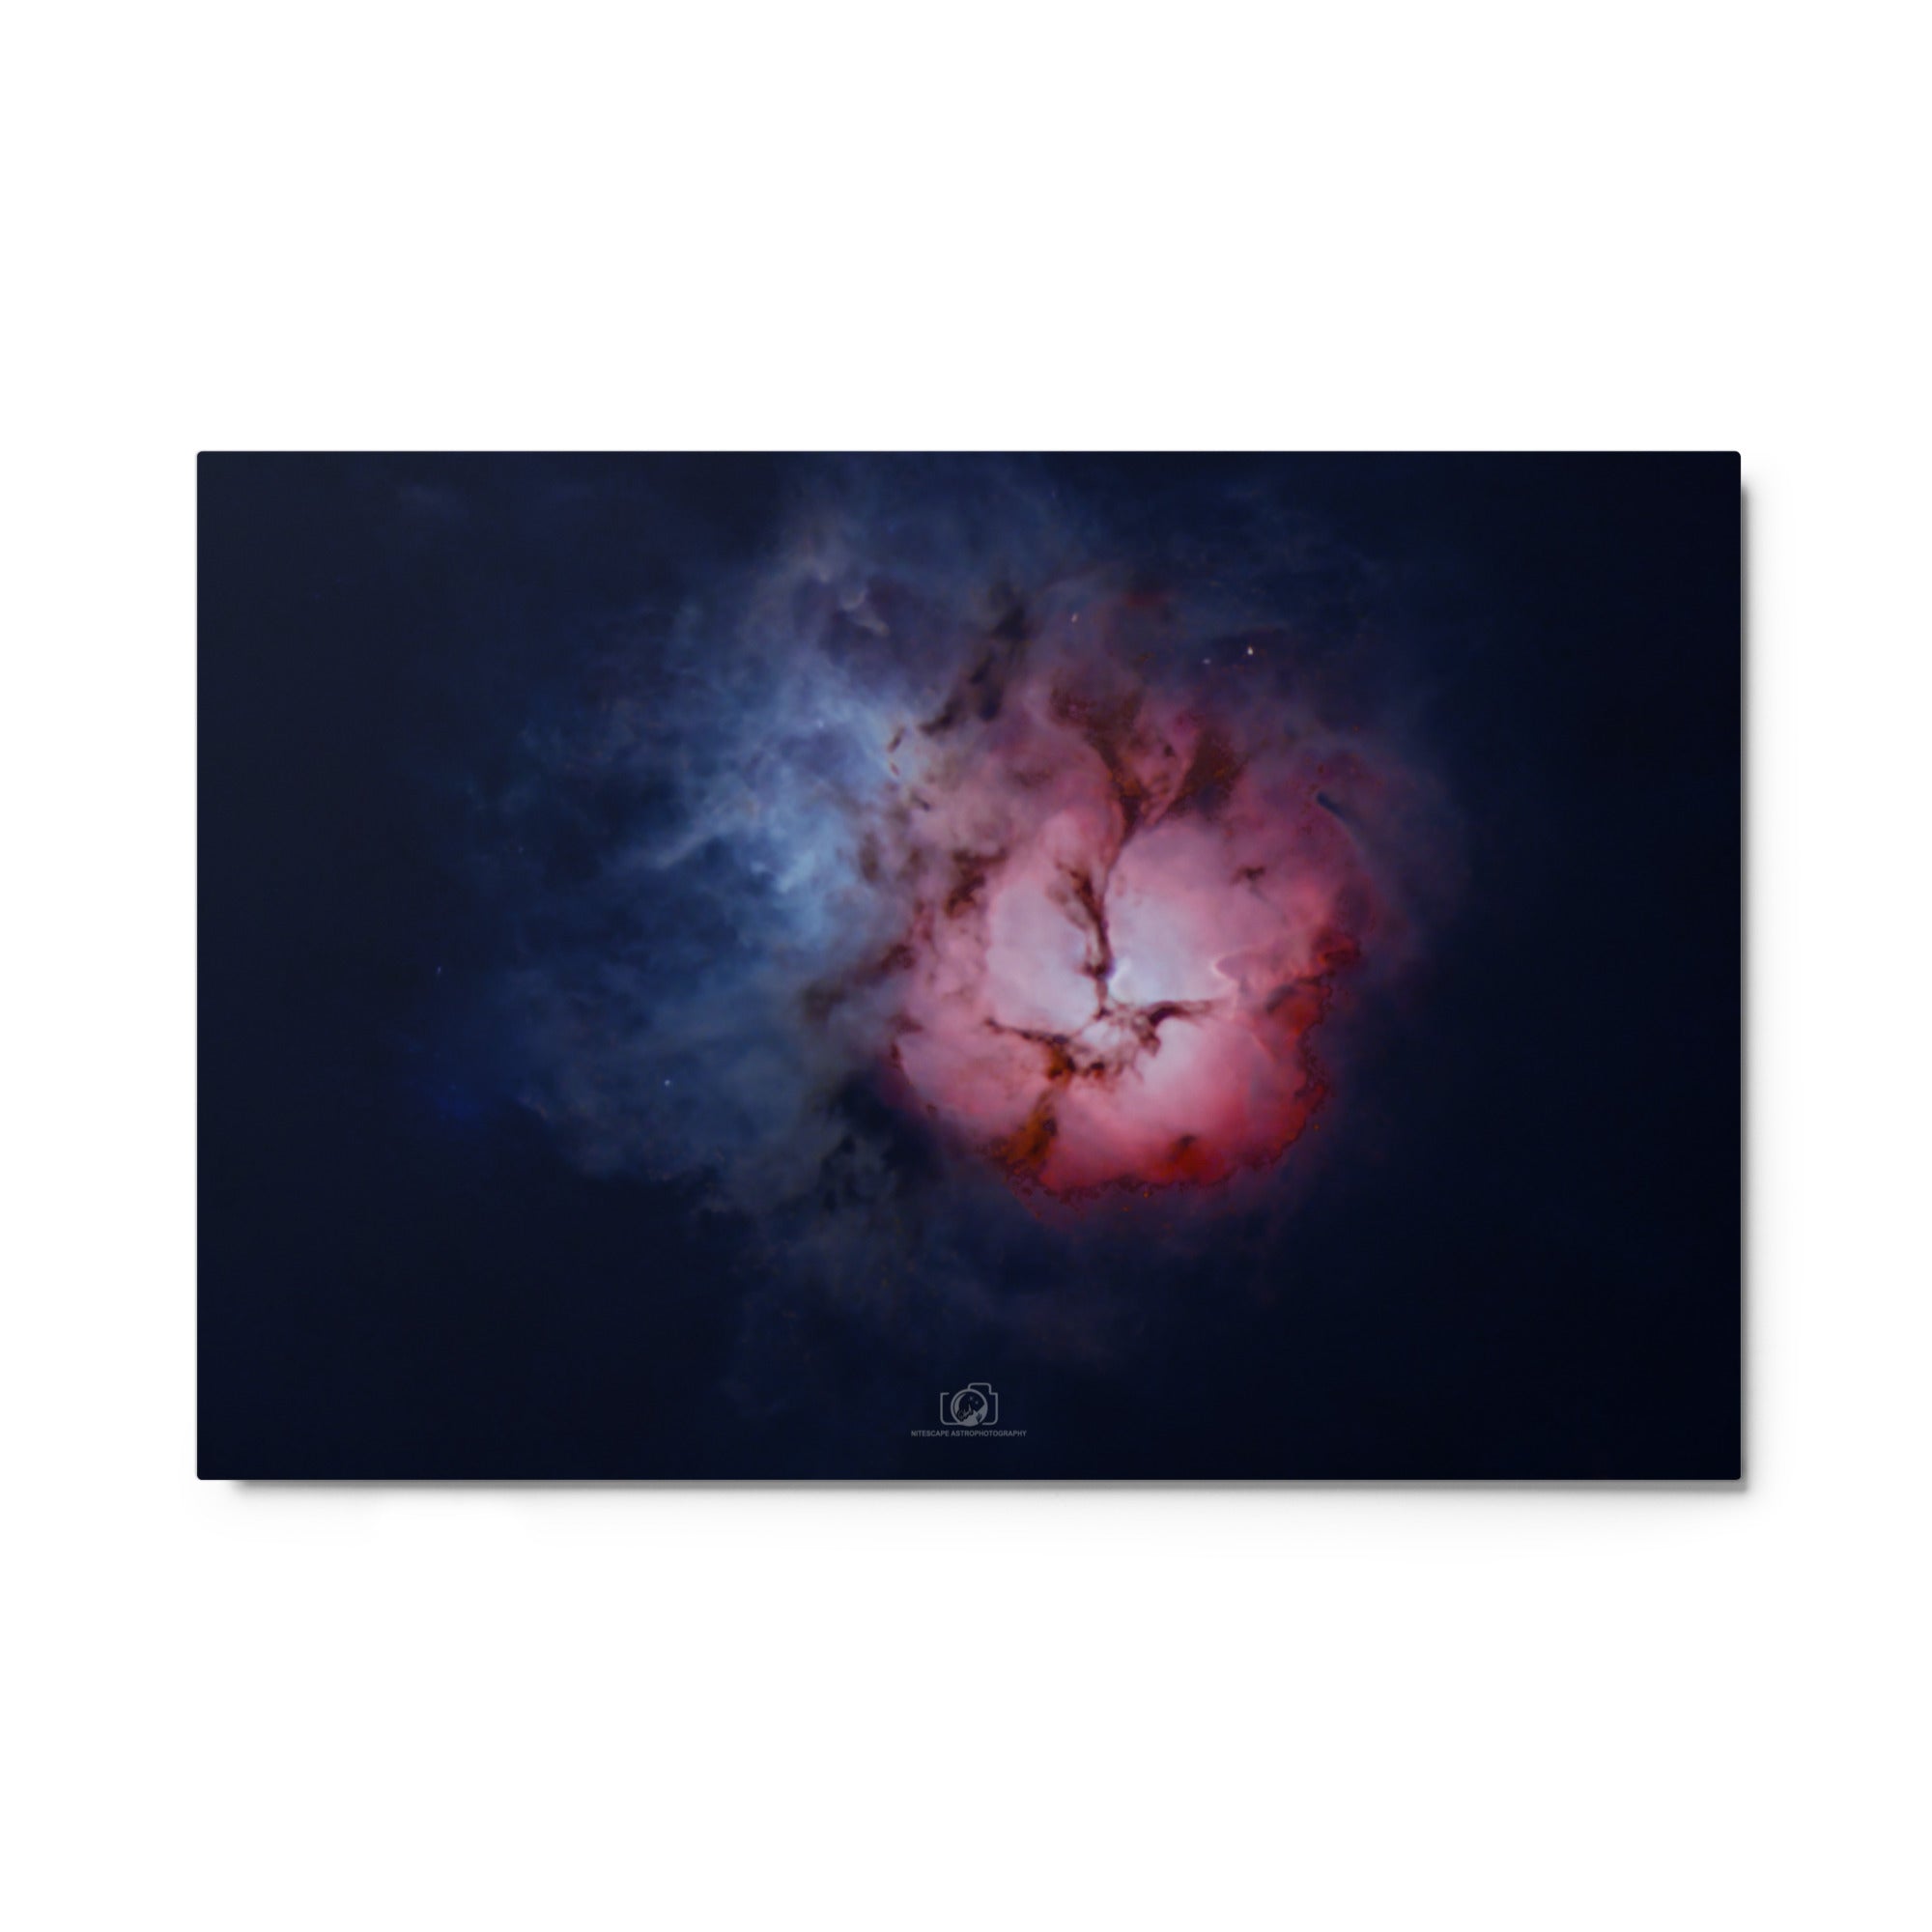 A captivating image of the Trifid Nebula, a stunning celestial formation located in the constellation of Sagittarius. The nebula exhibits a unique trifurcated appearance, with intricate swirls of gas and dust in vibrant shades of red, blue, and pink. This cosmic masterpiece showcases a blend of emission, reflection, and dark nebulae, providing a breathtaking glimpse into the celestial wonders that adorn our universe.